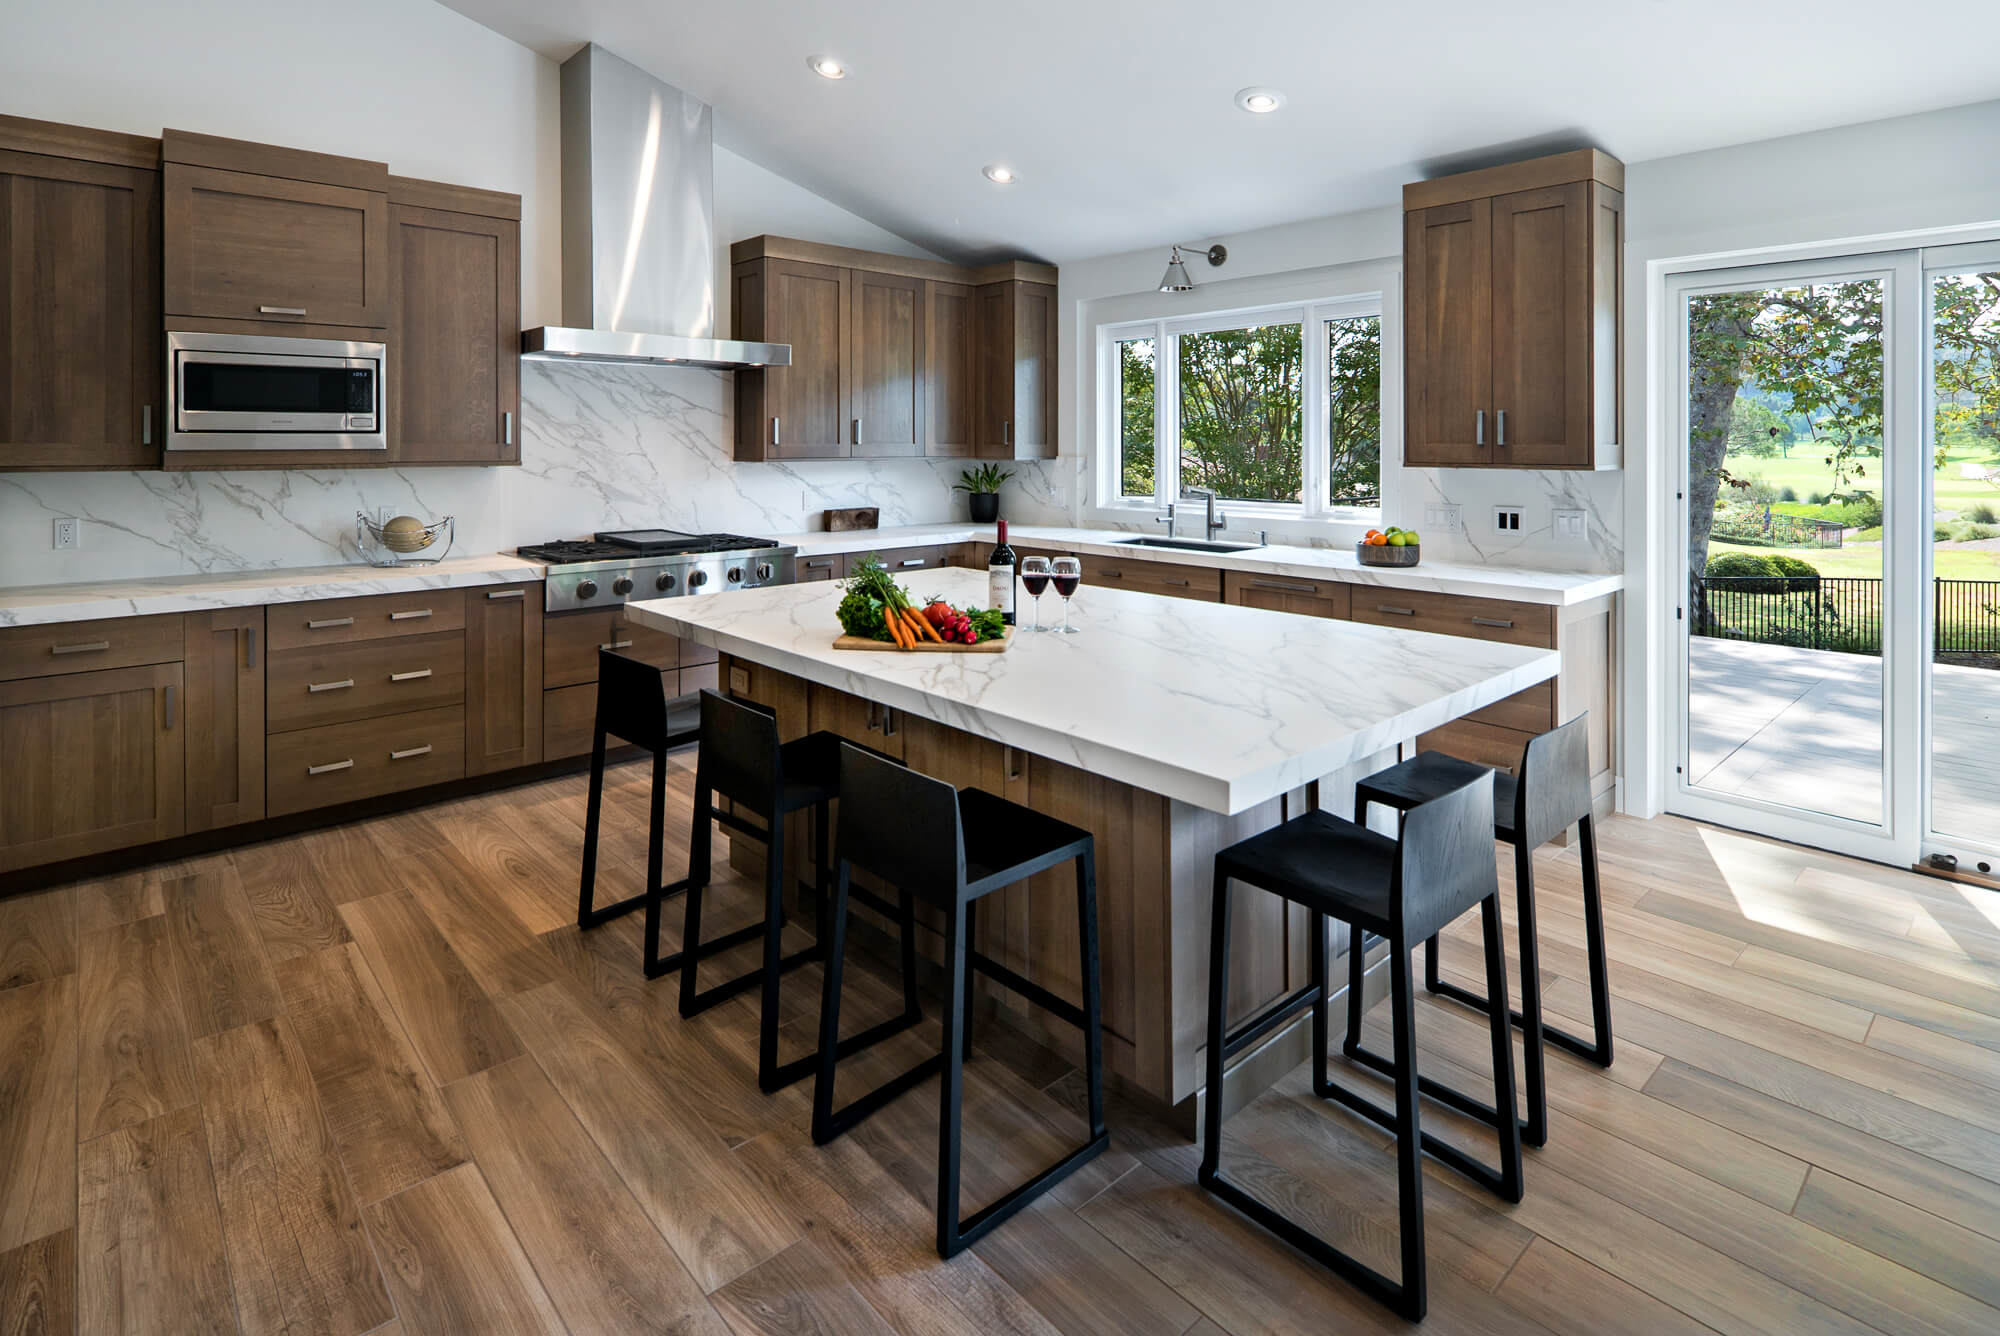 Using Wood in your kitchen remodel will keep you on trend in 2020 and years to come.